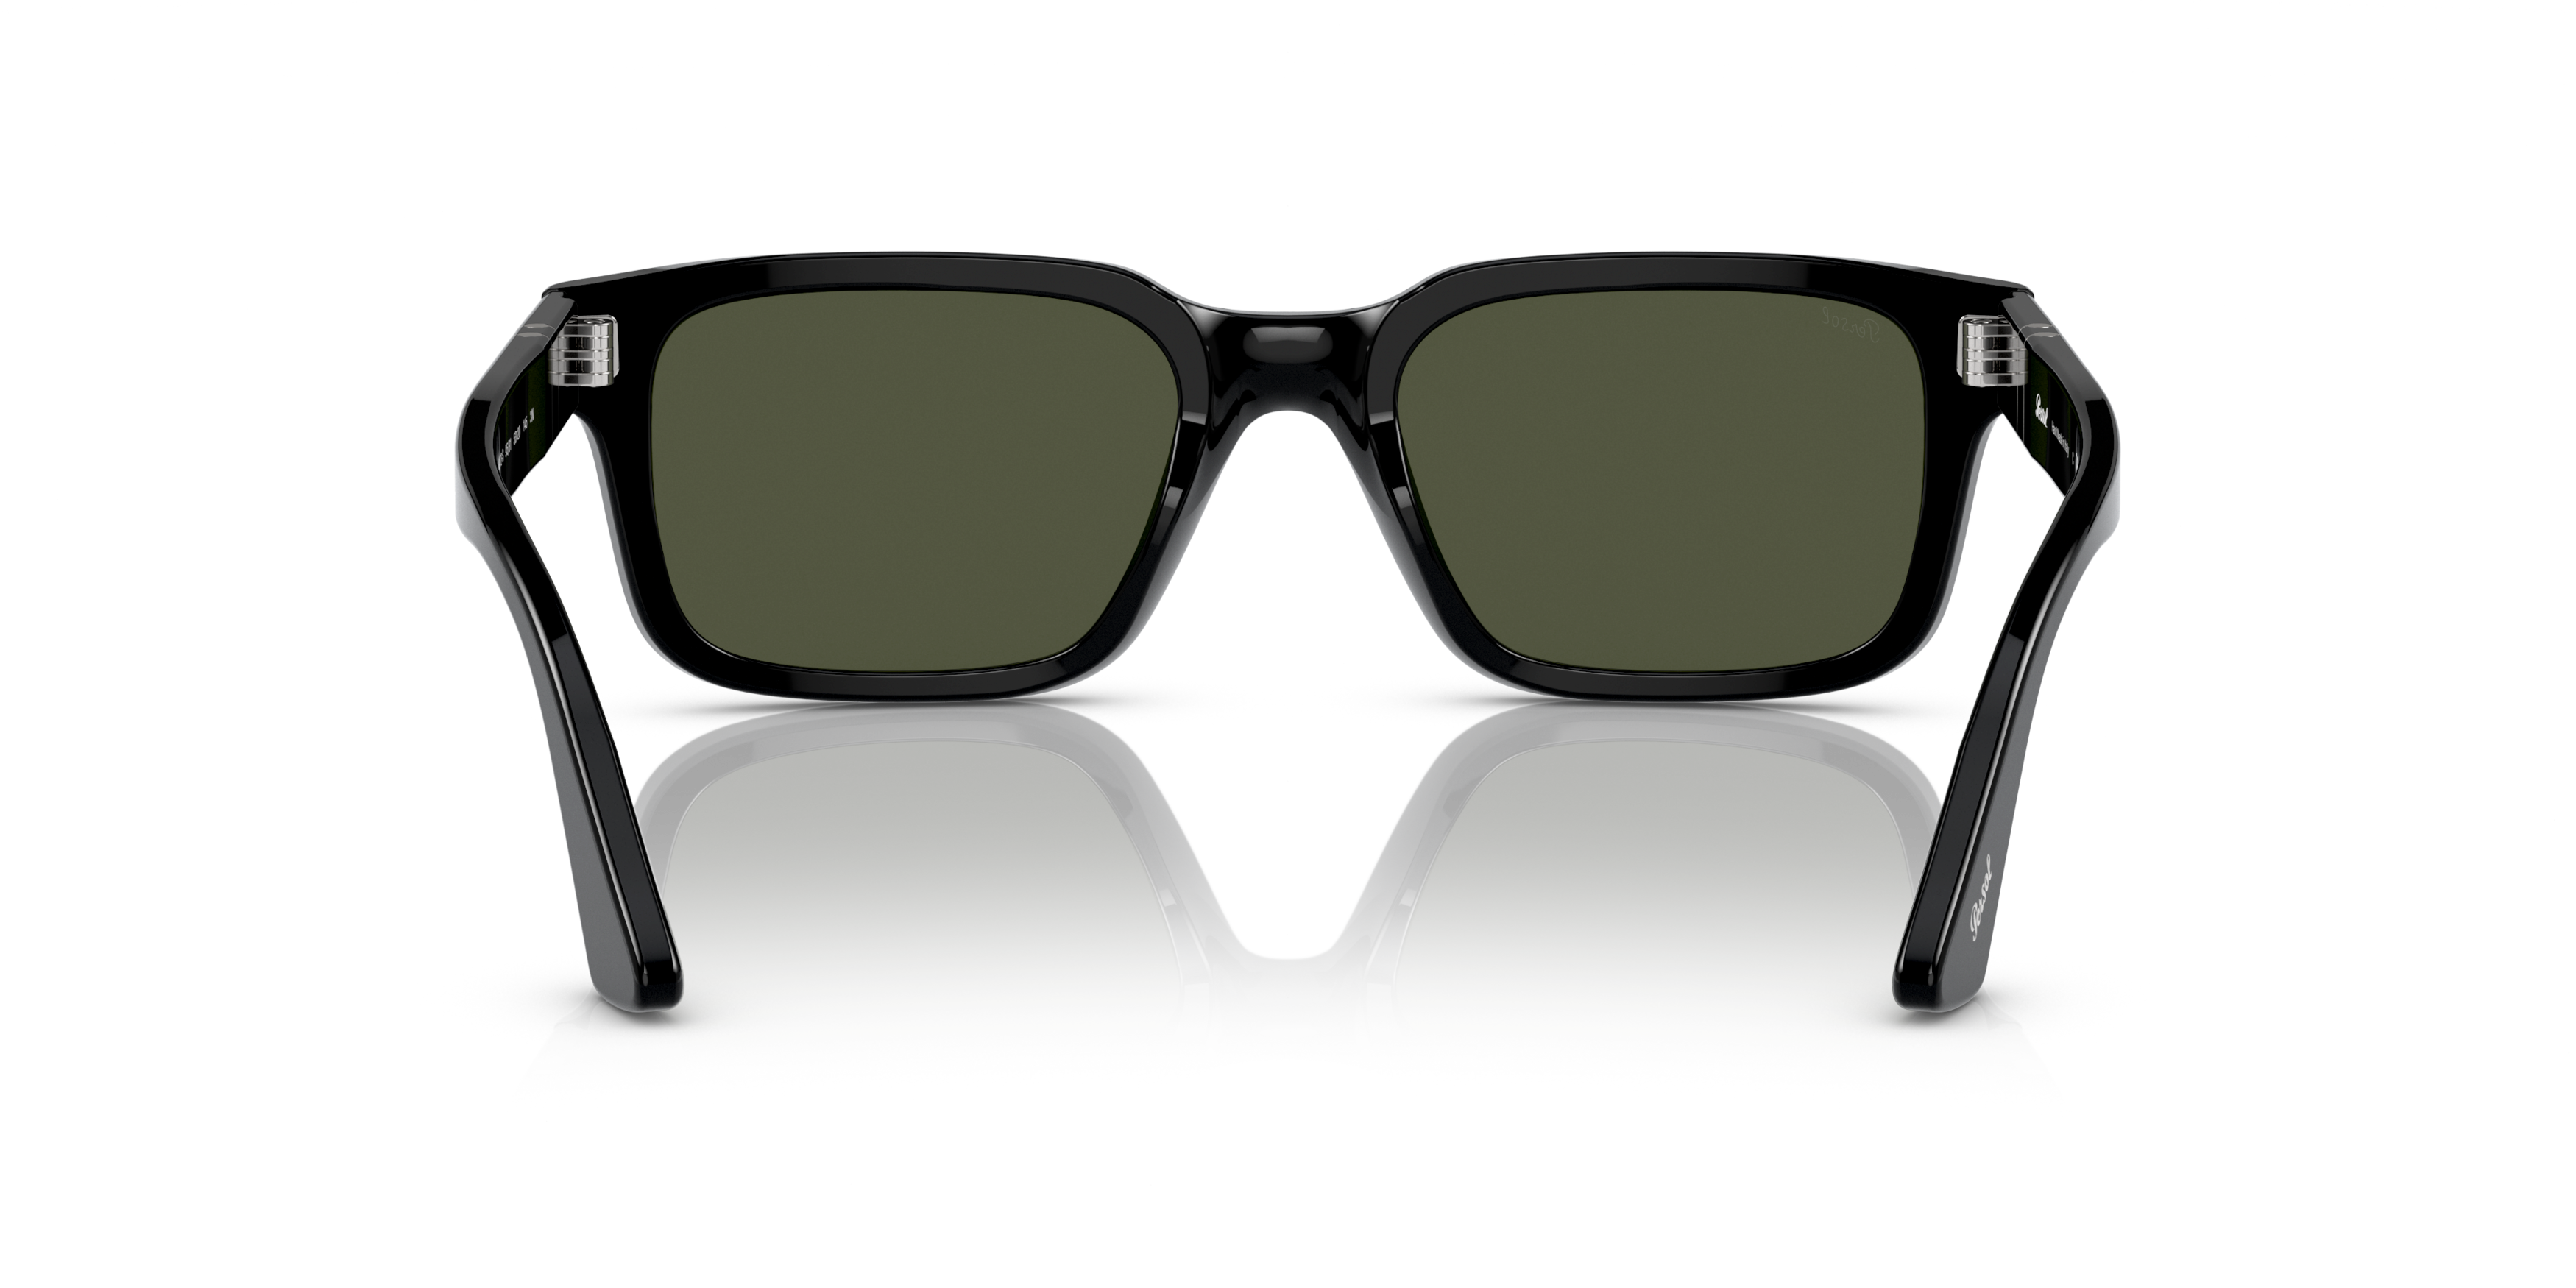 [products.image.detail02] Persol 0PO3272S 95/31